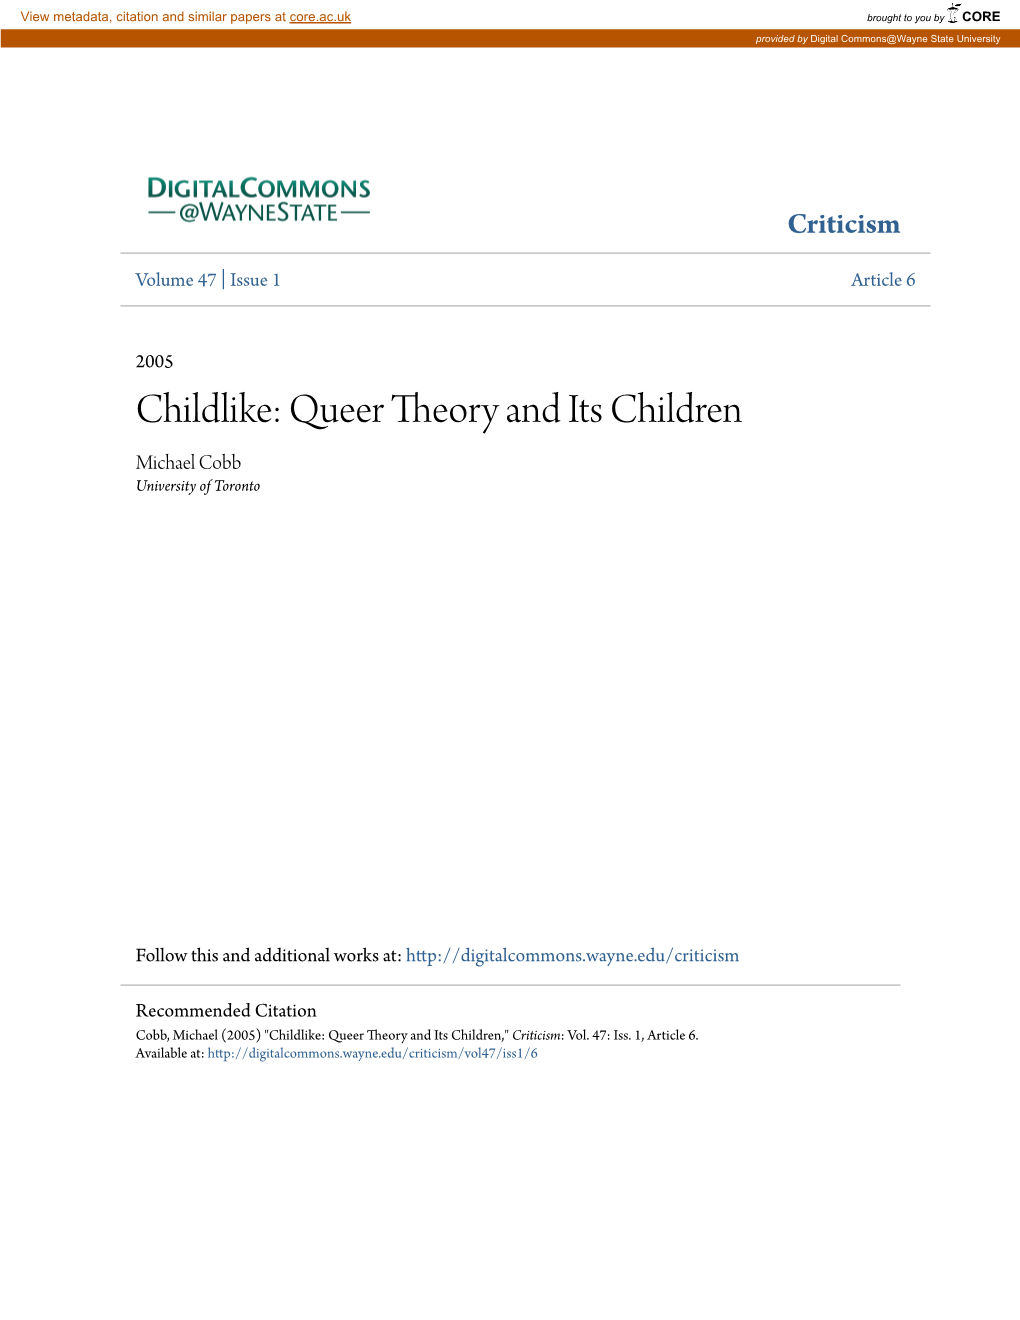 Queer Theory and Its Children Michael Cobb University of Toronto